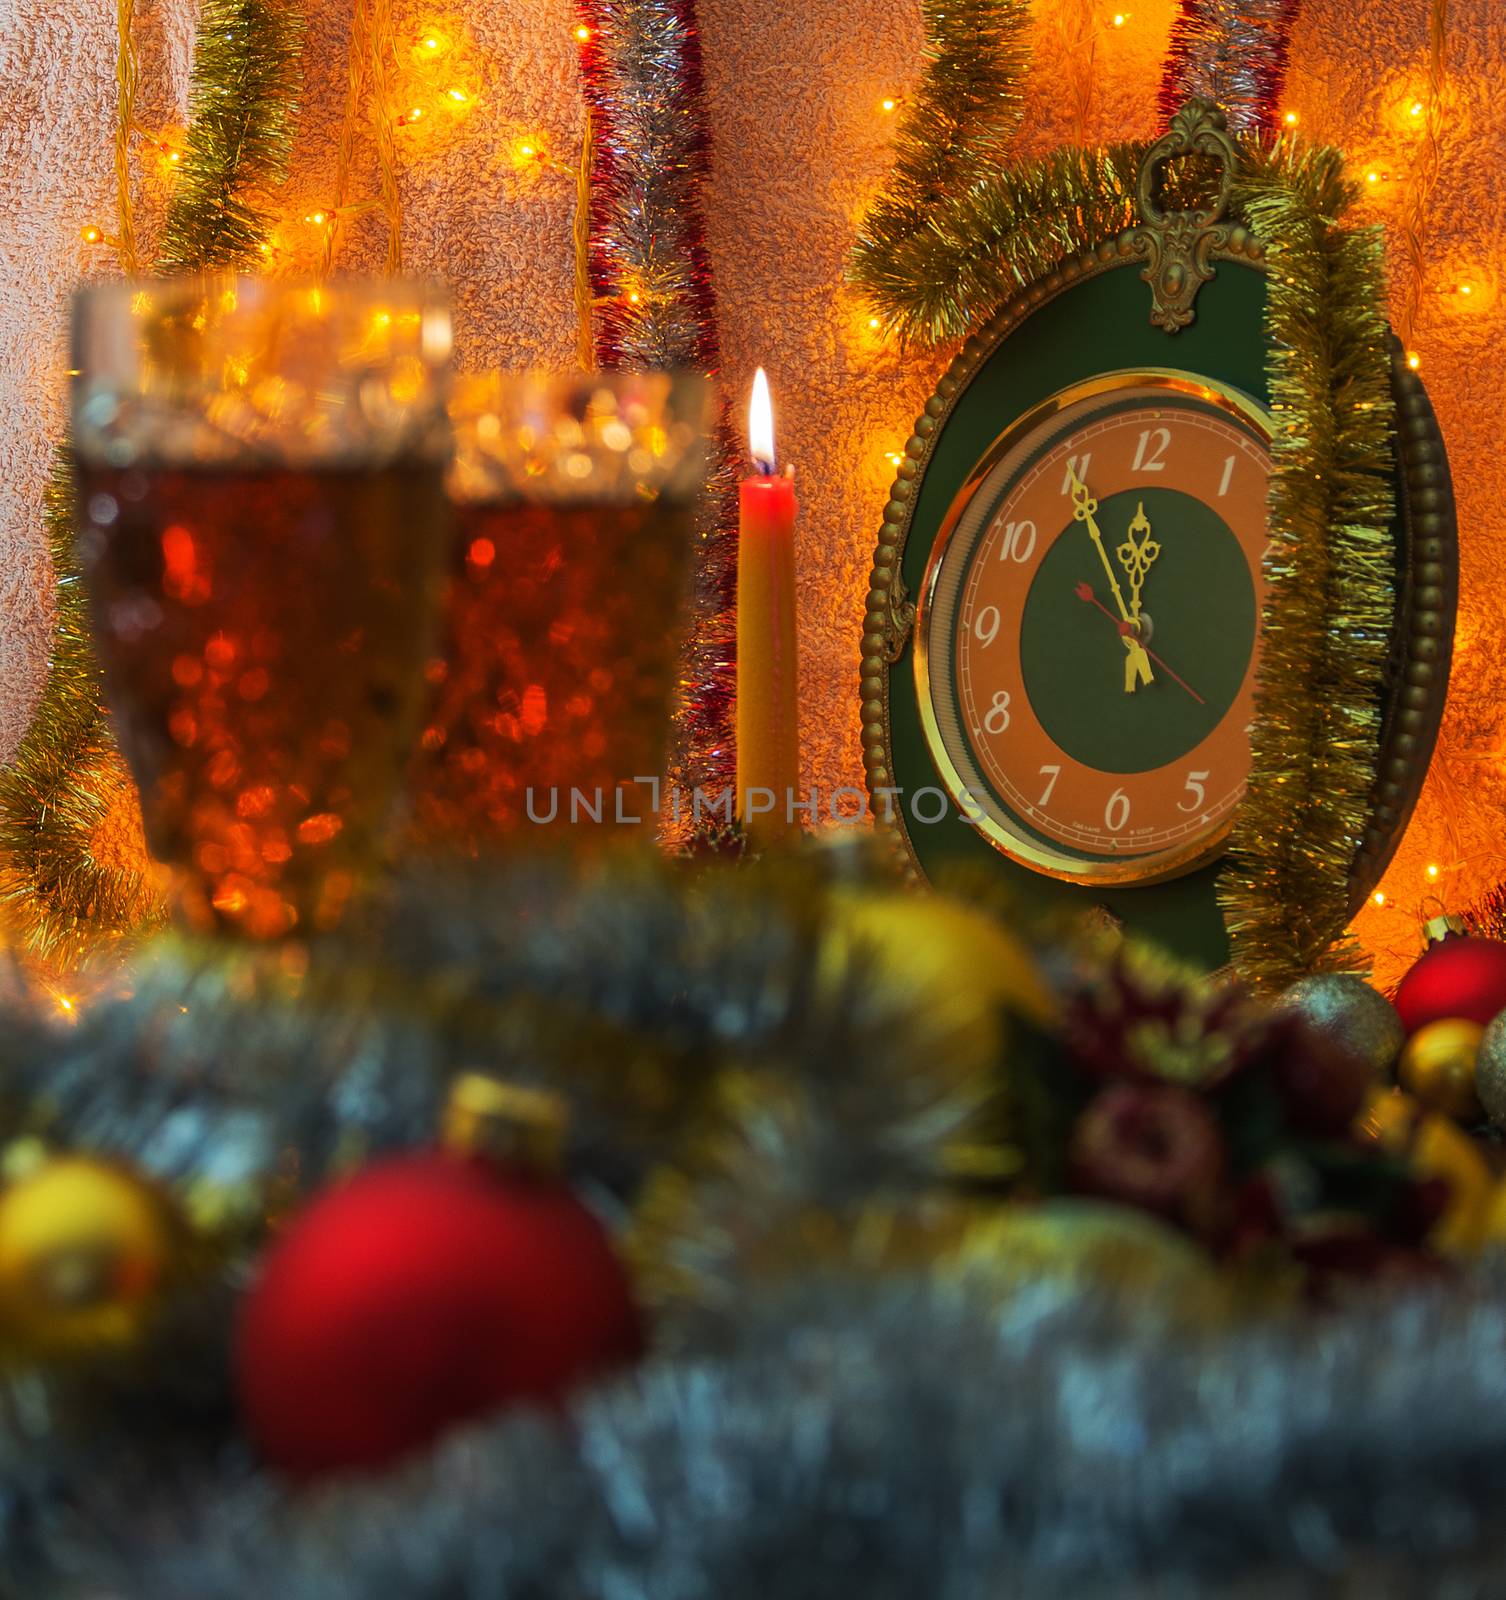 Christmas story with the clock, candles and wine glasses with ch by Grommik